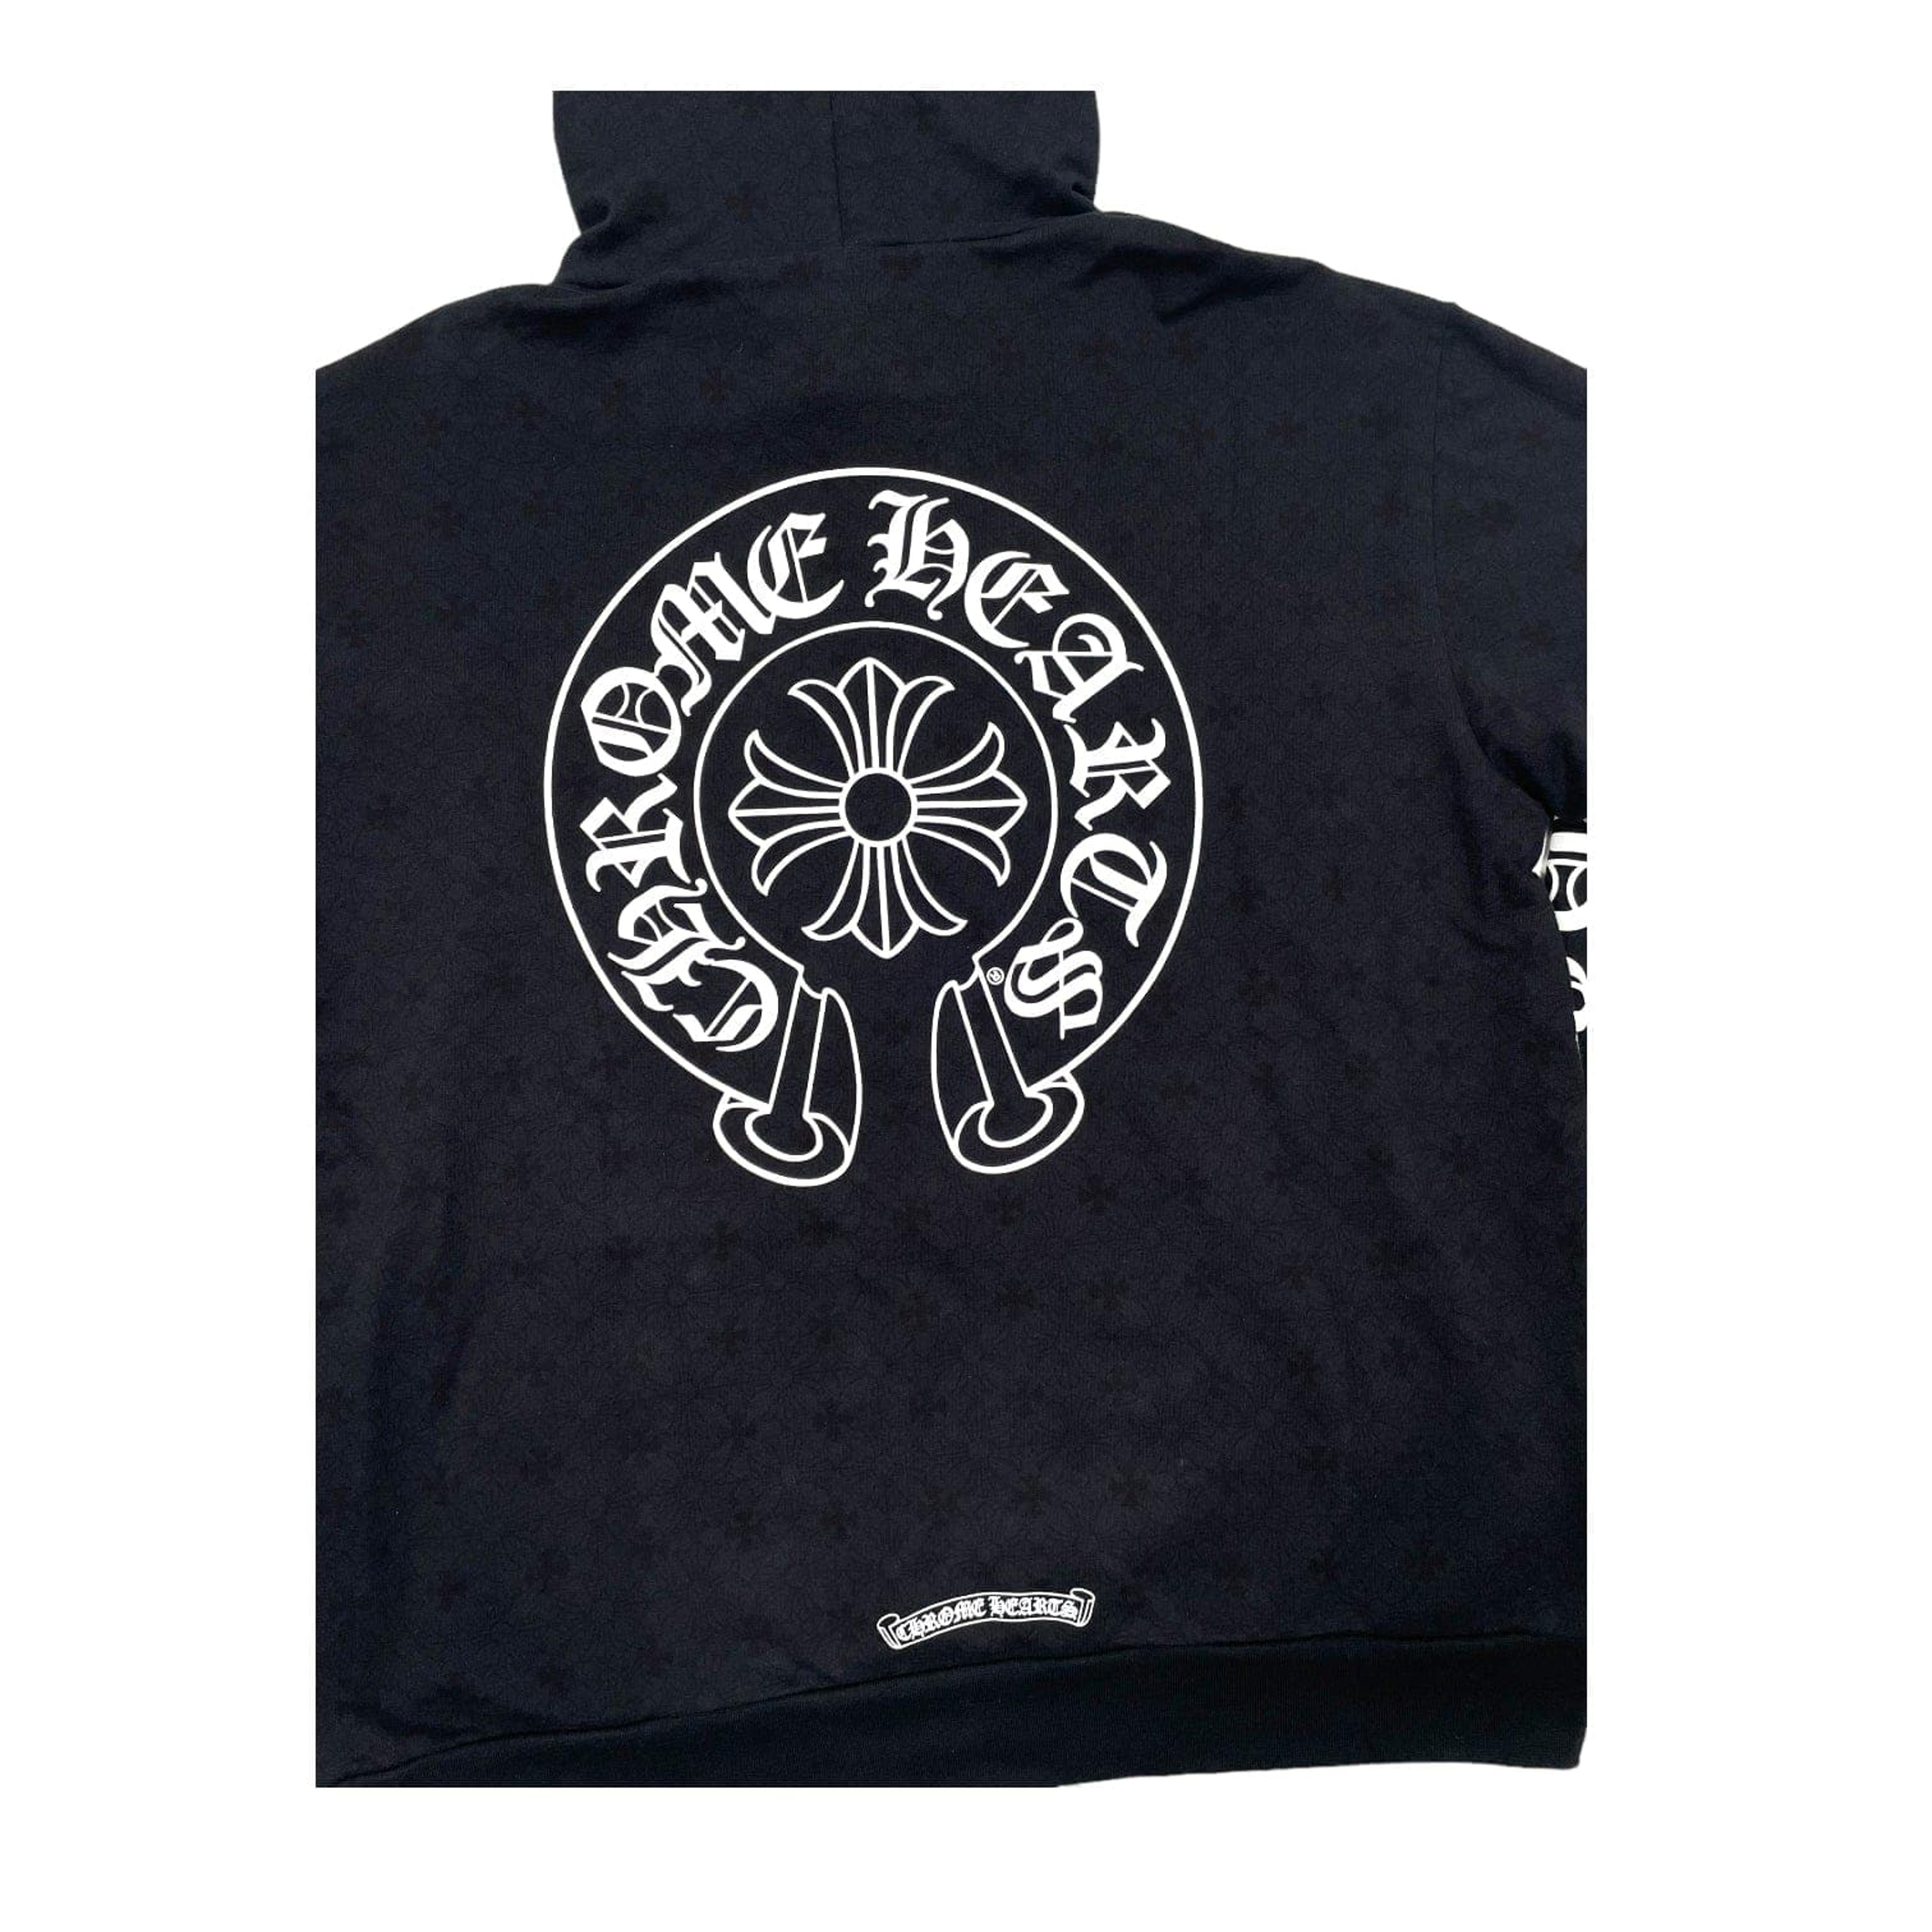 Alternate View 5 of Chrome Hearts Sublimated Vertical Logo Hooded Sweatshirt Black